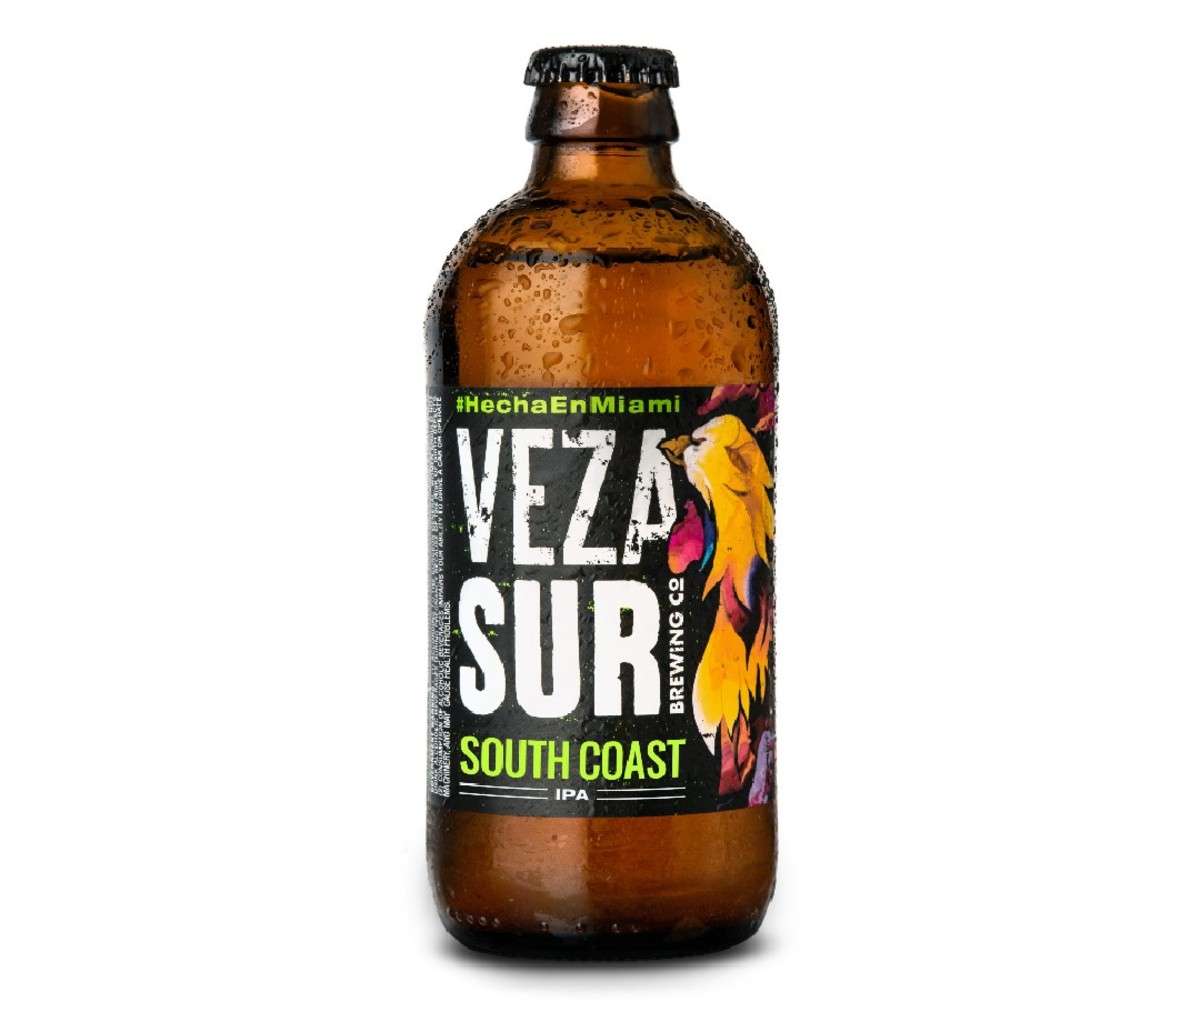 A bottle of Veza Sur Brewing South Coast IPA.